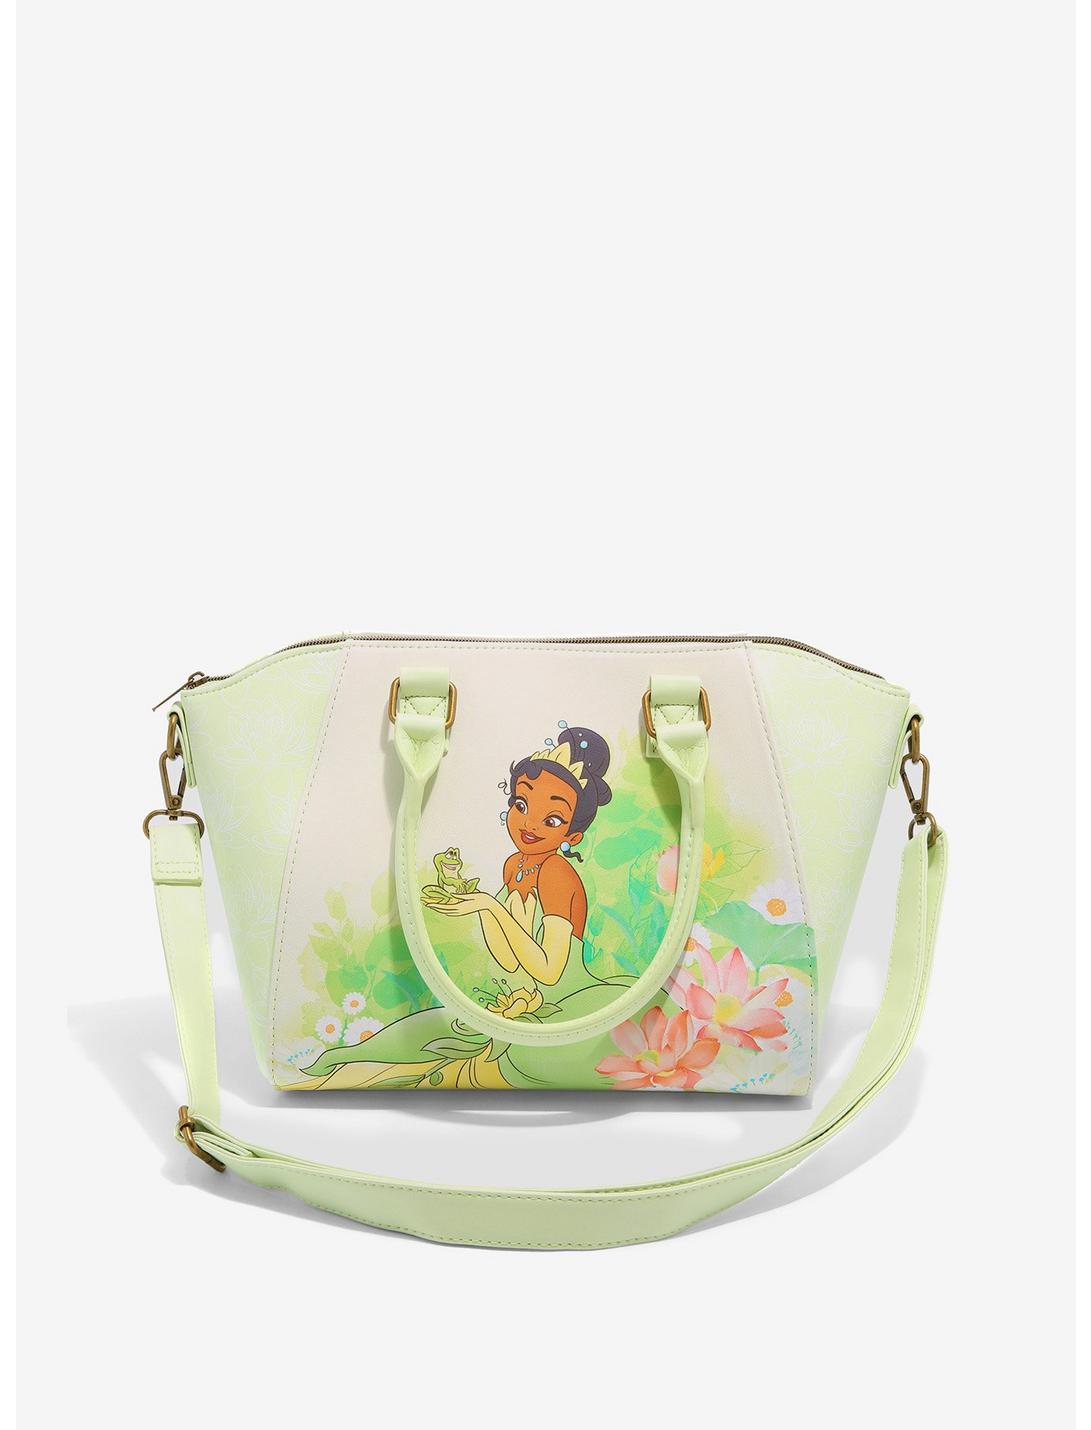 Loungefly Disney The Princess And The Frog Watercolor Satchel Bag